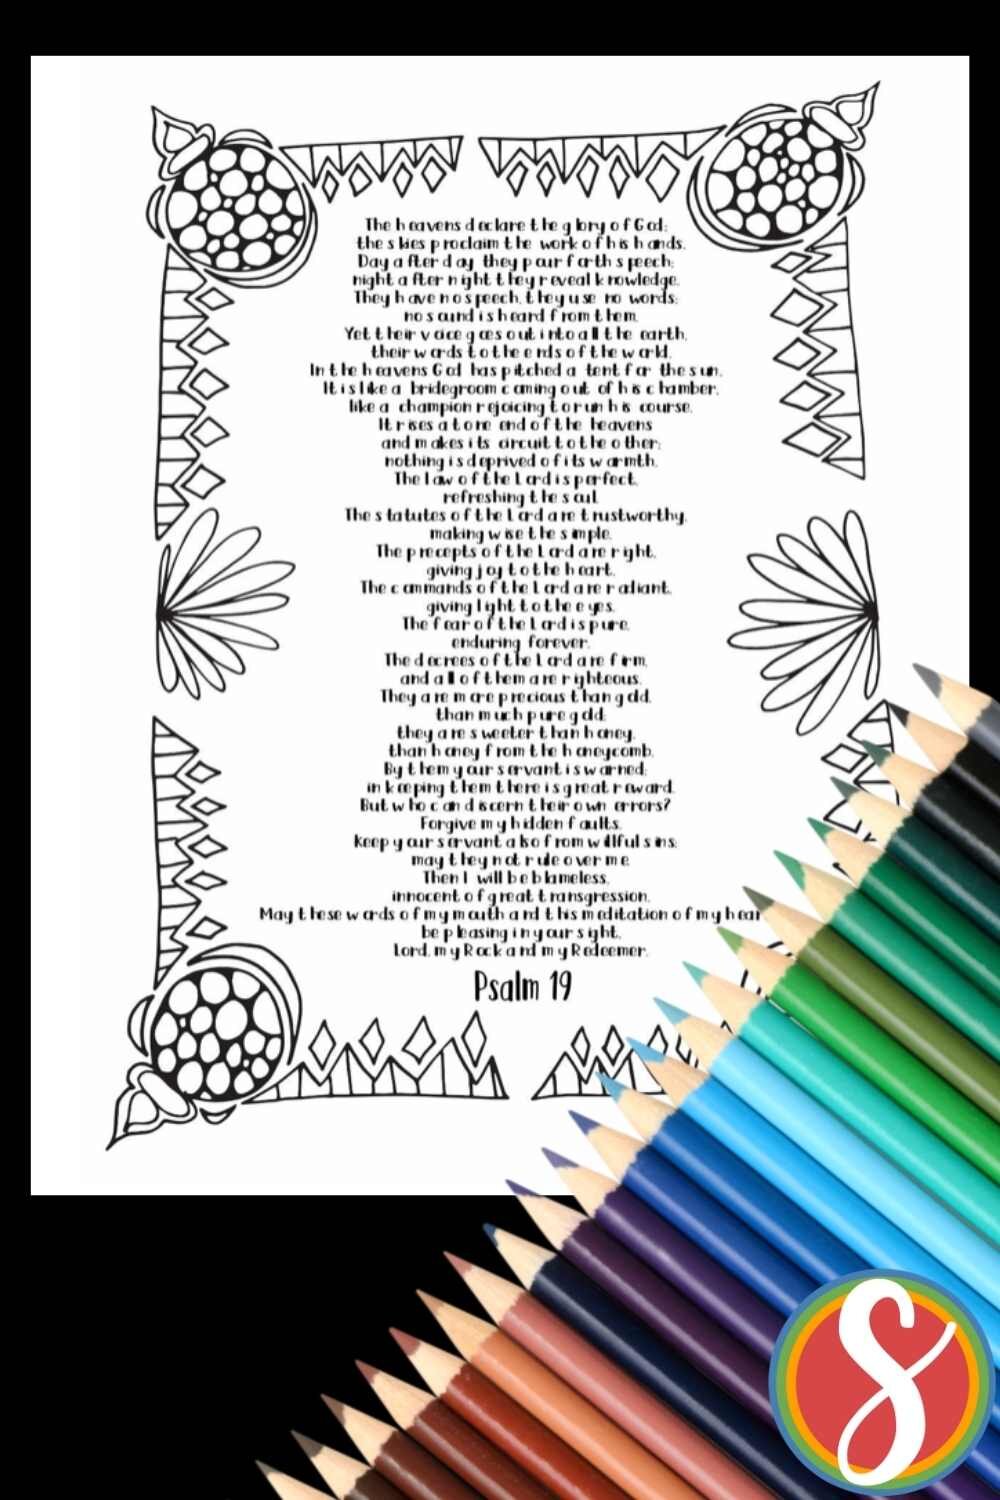 Free Psalm 19 coloring page from Stevie Doodles - a coloring page for every psalm